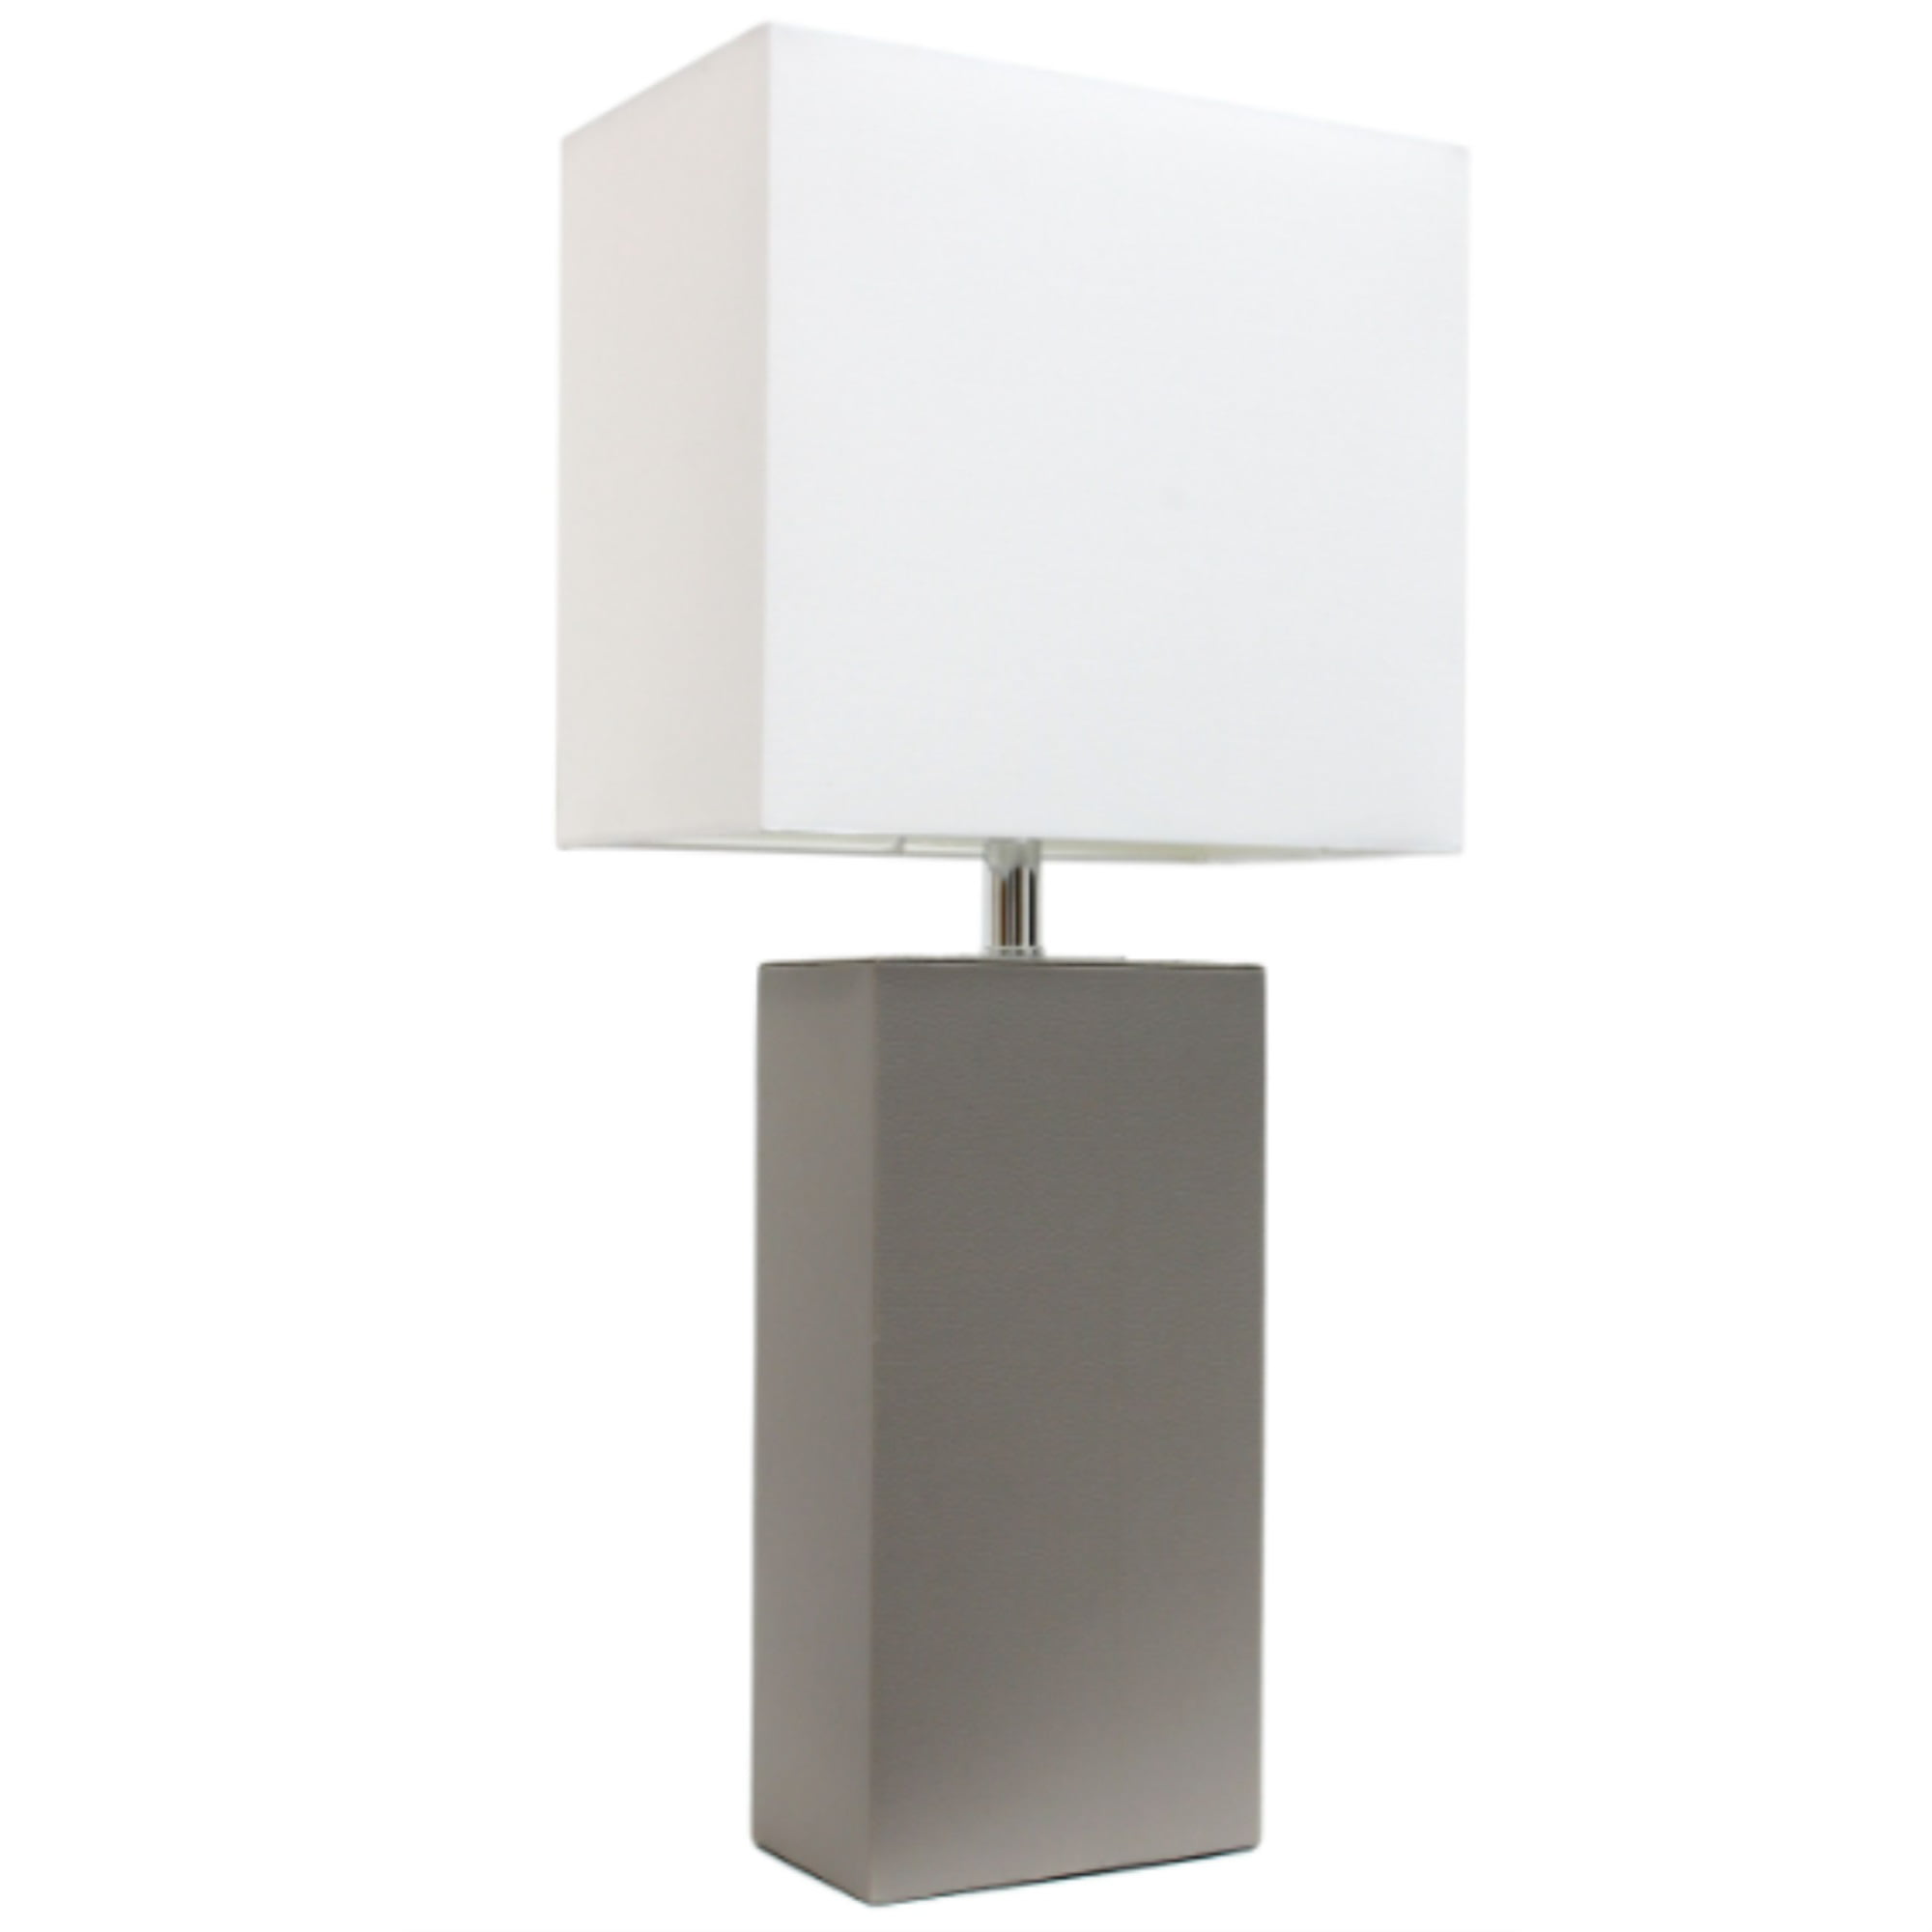 Elegant Designs Modern Leather Table Lamp with White Fabric Shade, Gray